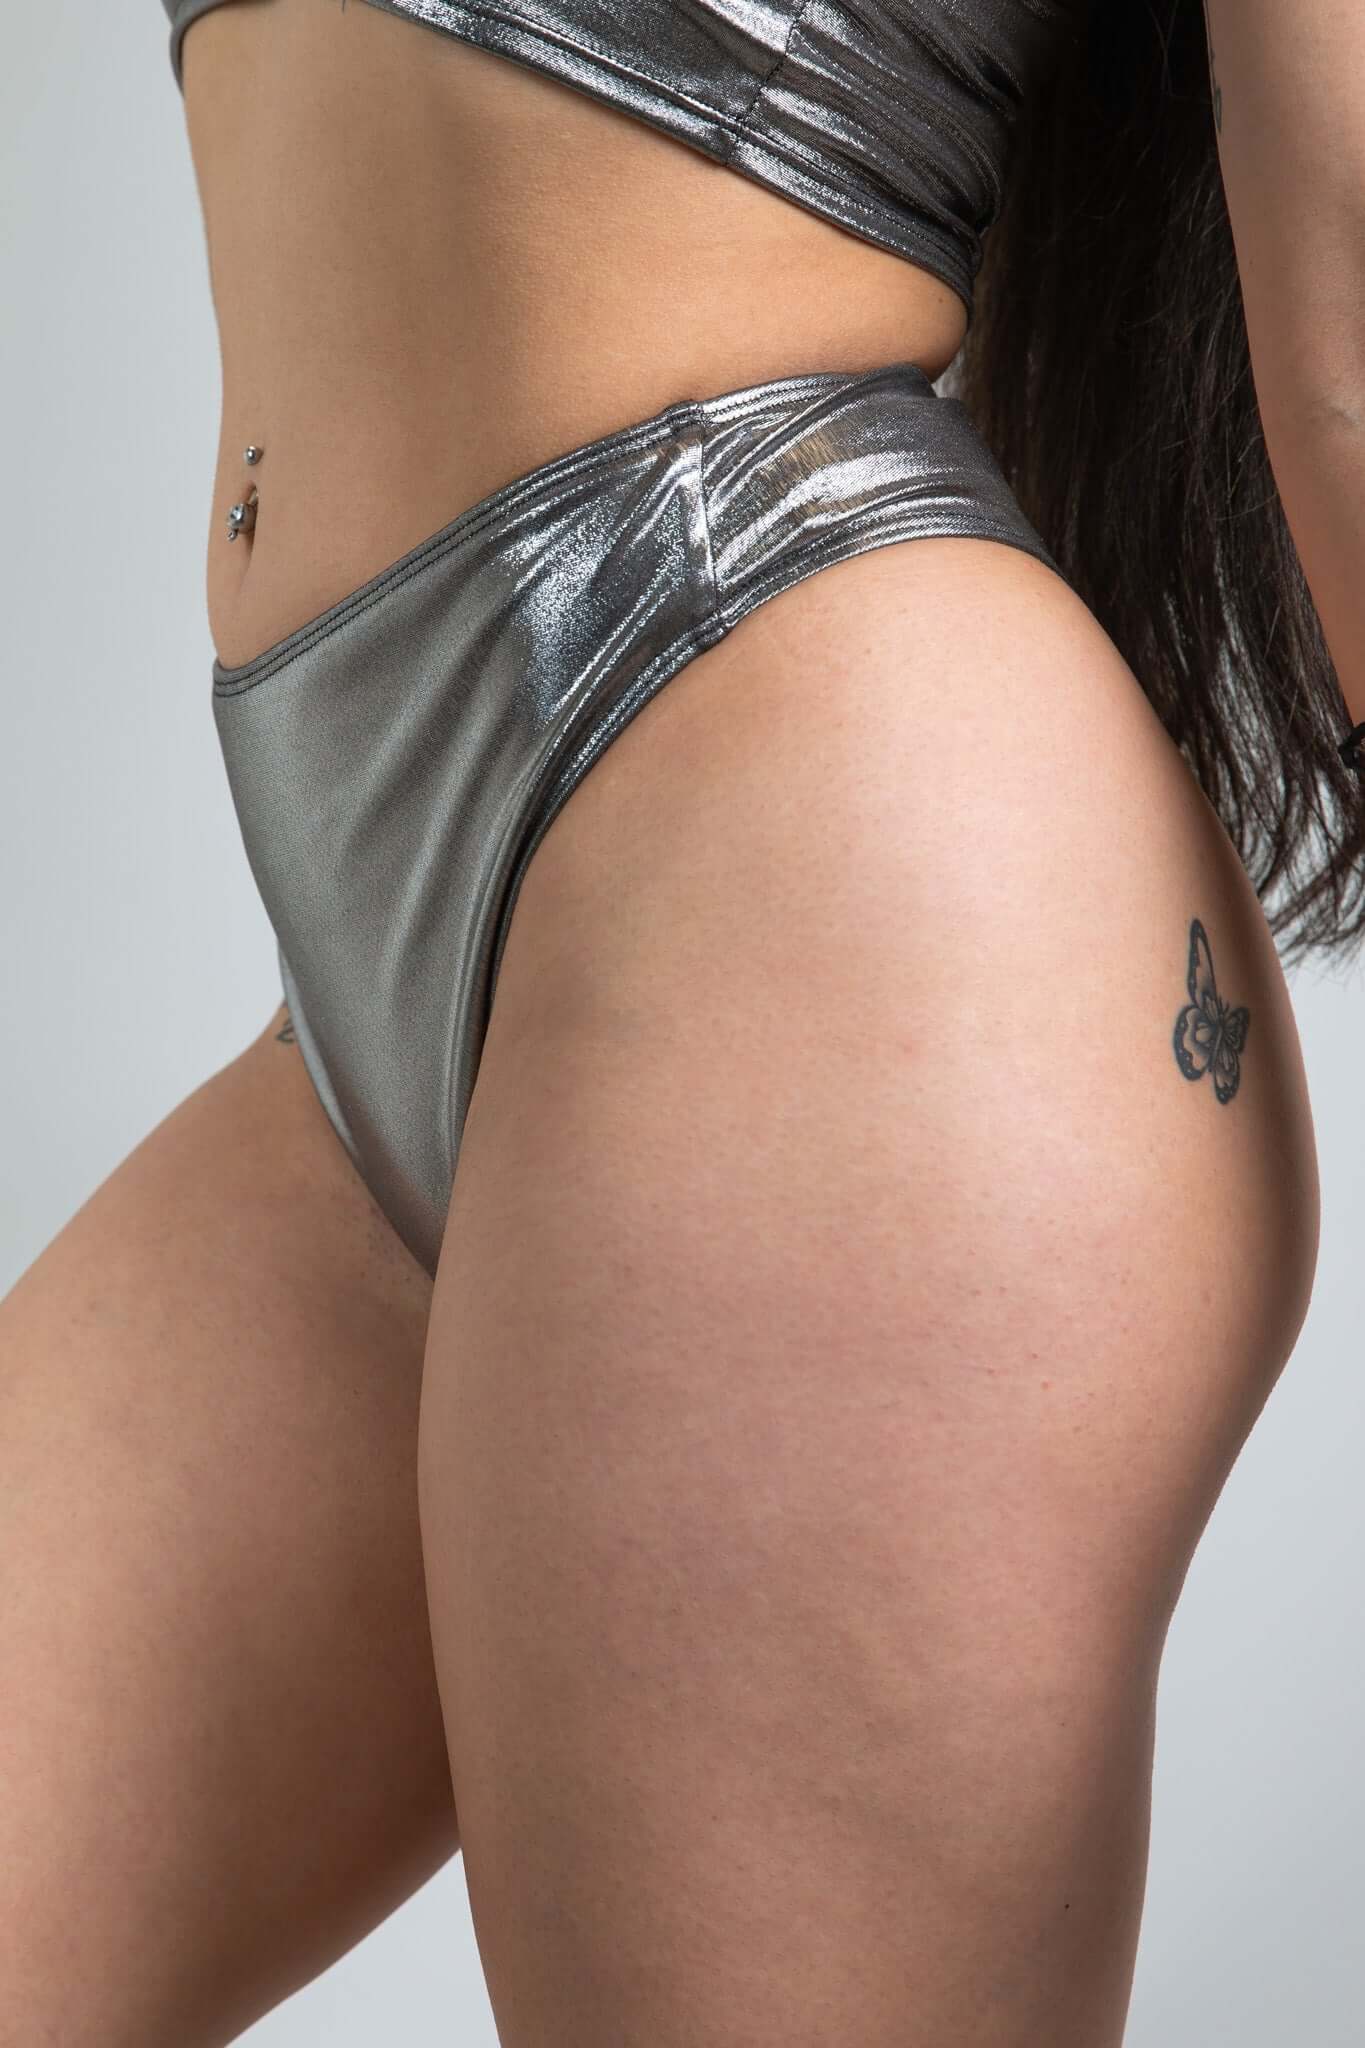 An up close photo of a woman wearing chrome bikini bottoms with a matching crop top. She is facing to the left.